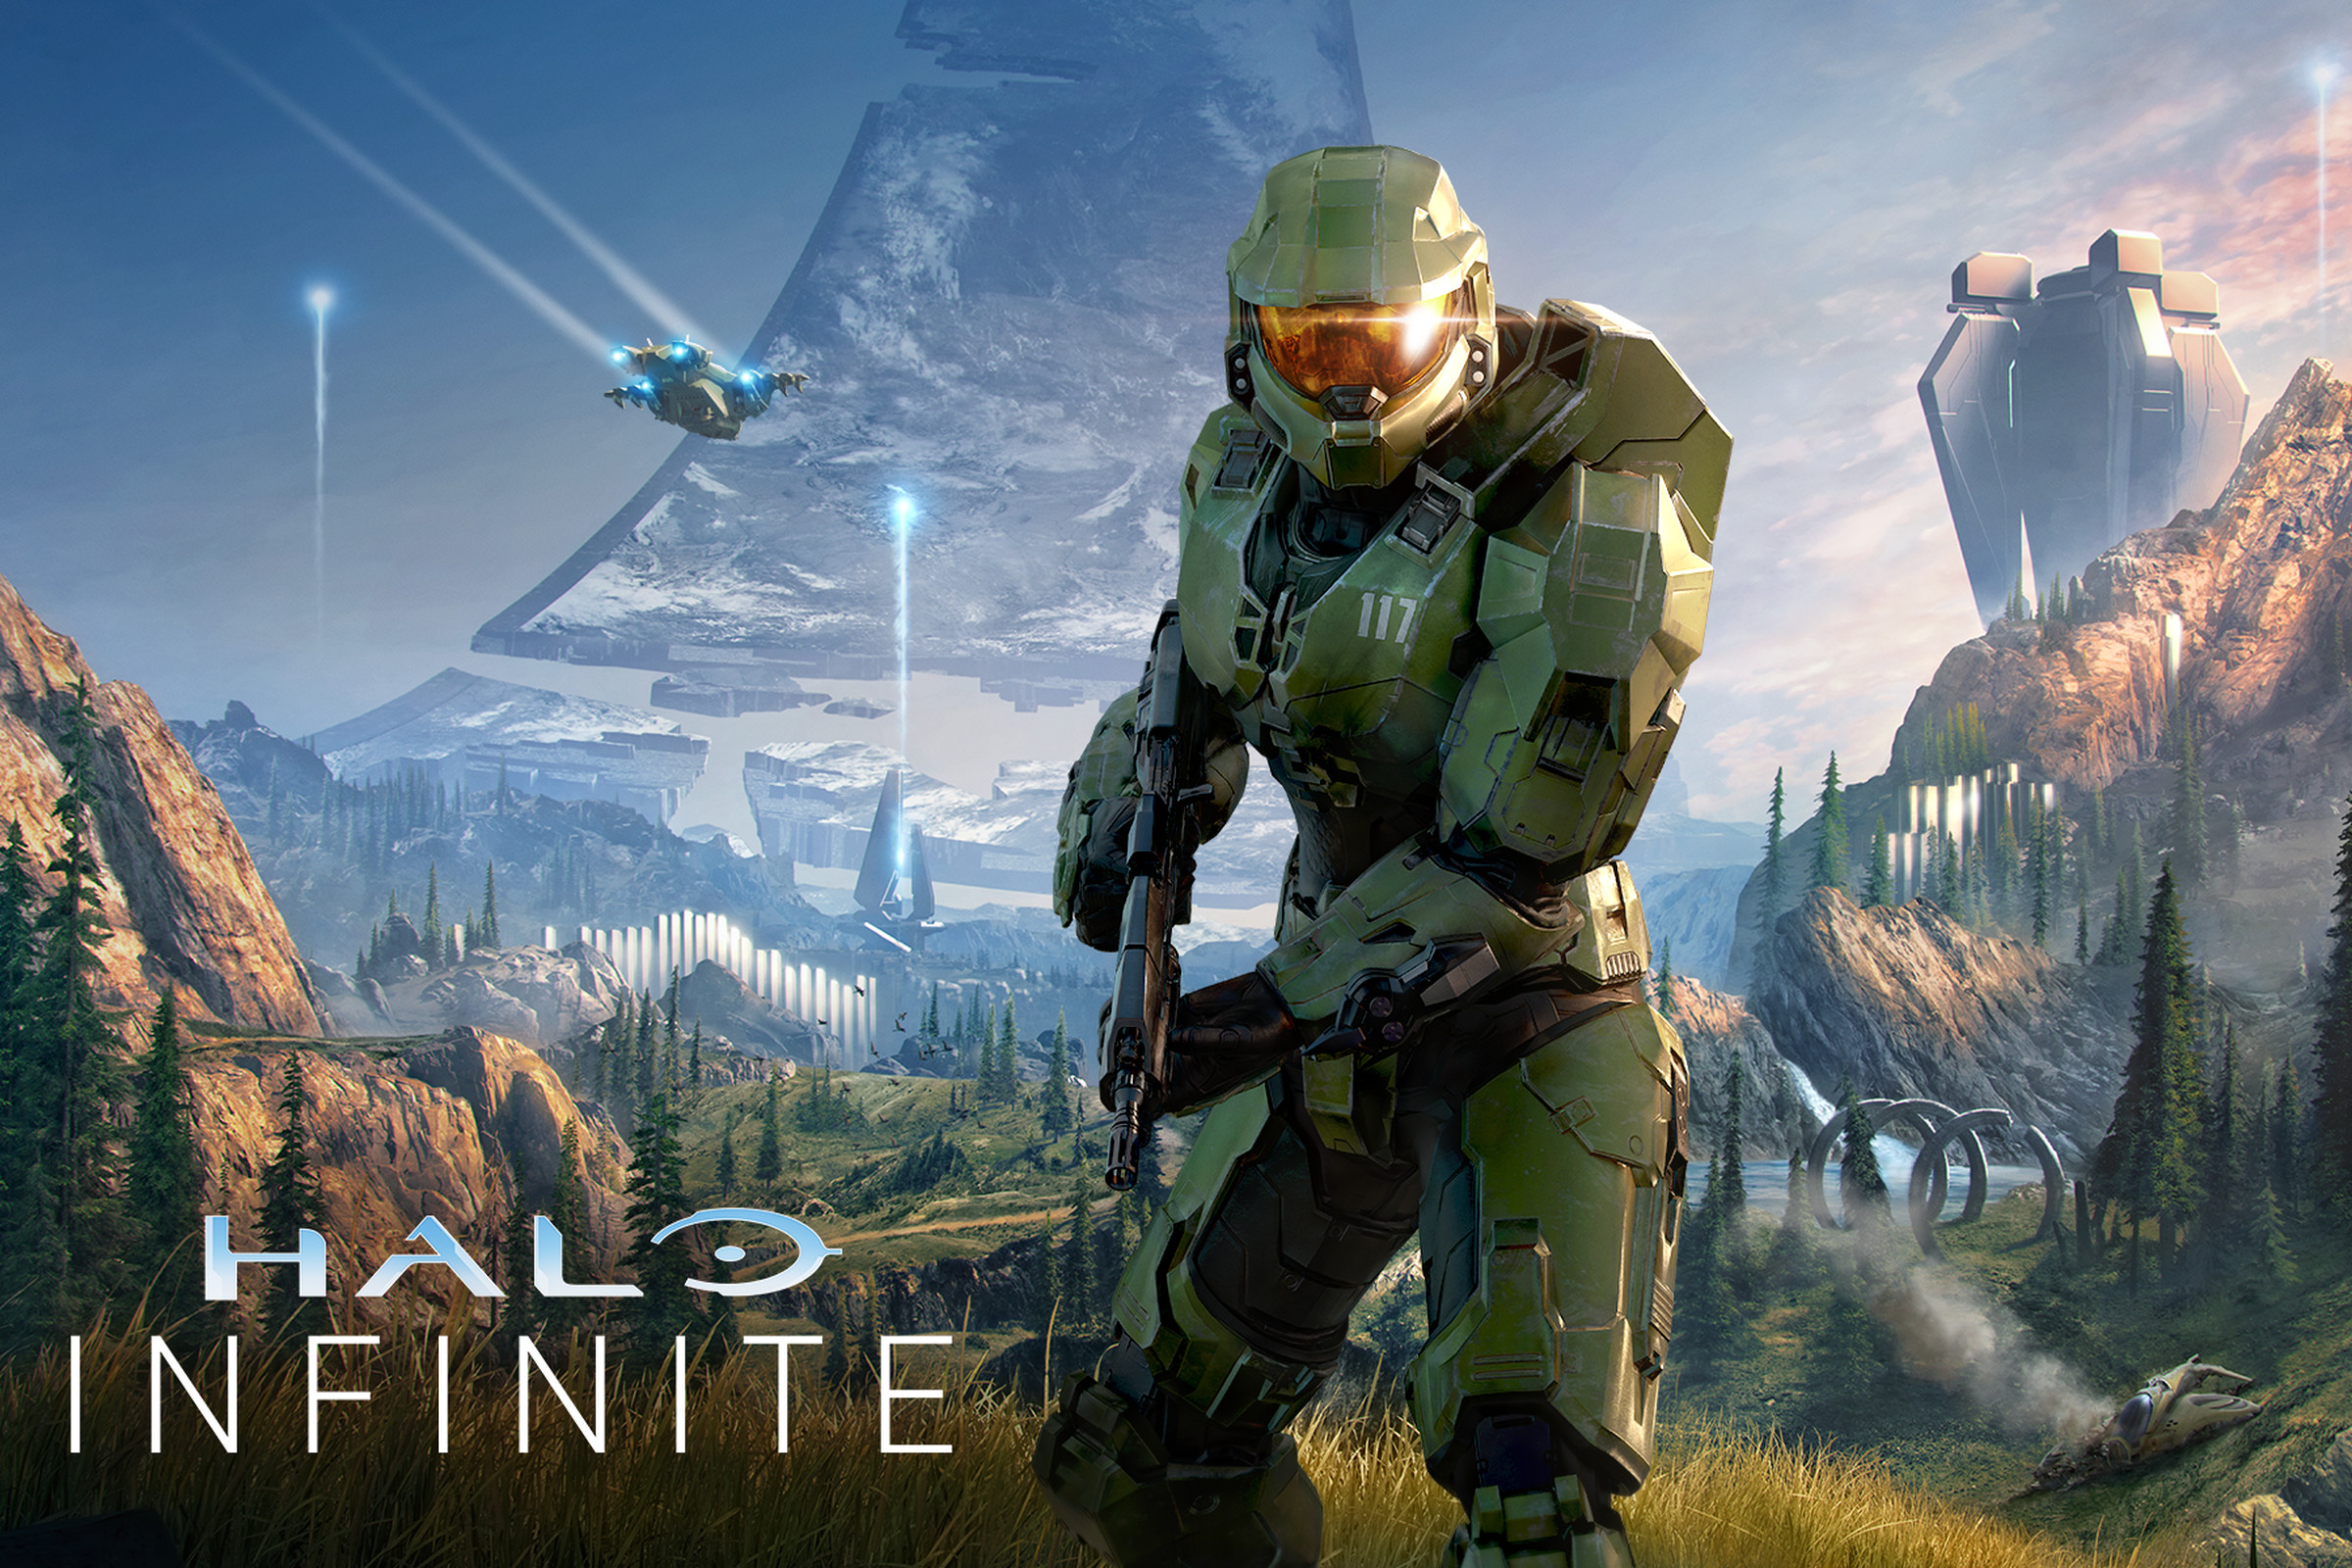 Over 20 million people have played Halo Infinite.